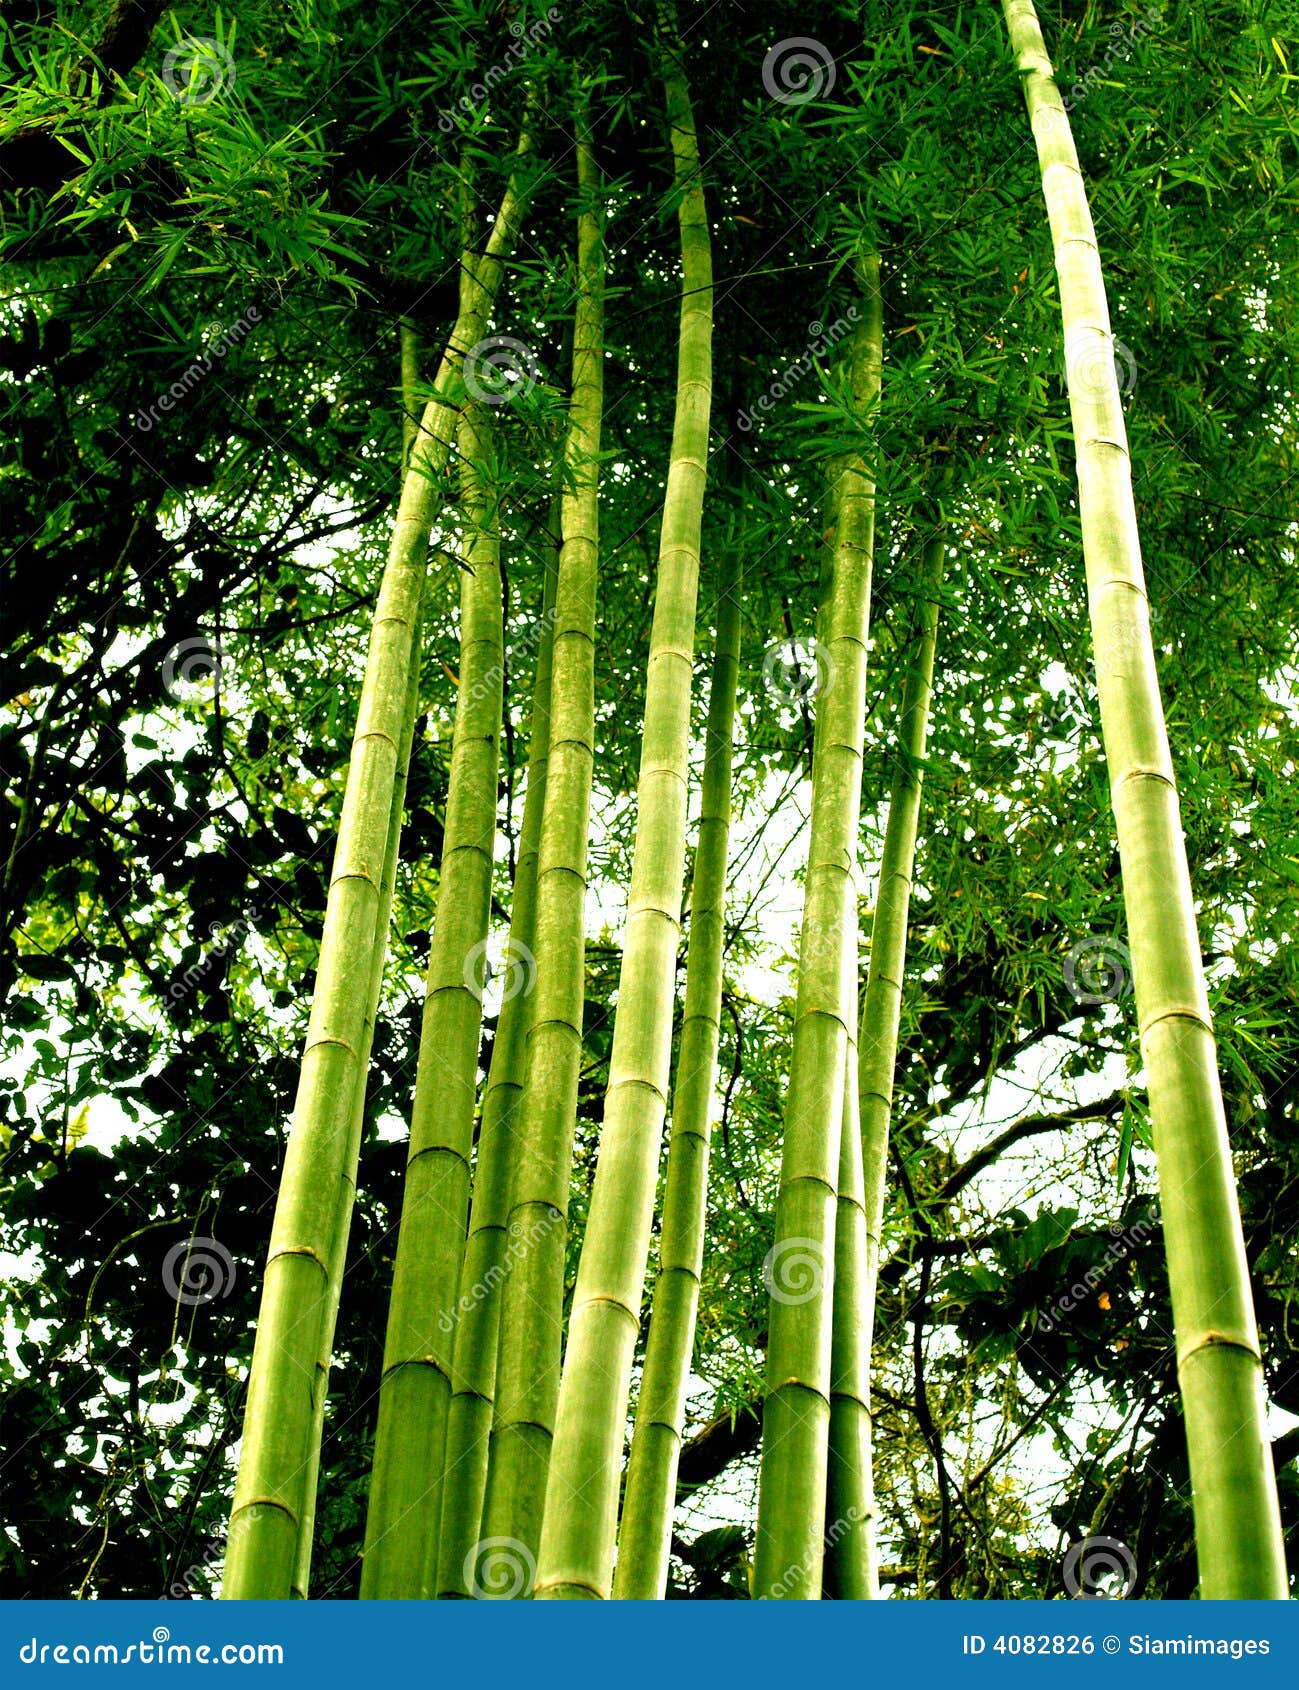  Bamboo  Tree  01 stock photo Image  of background forest 